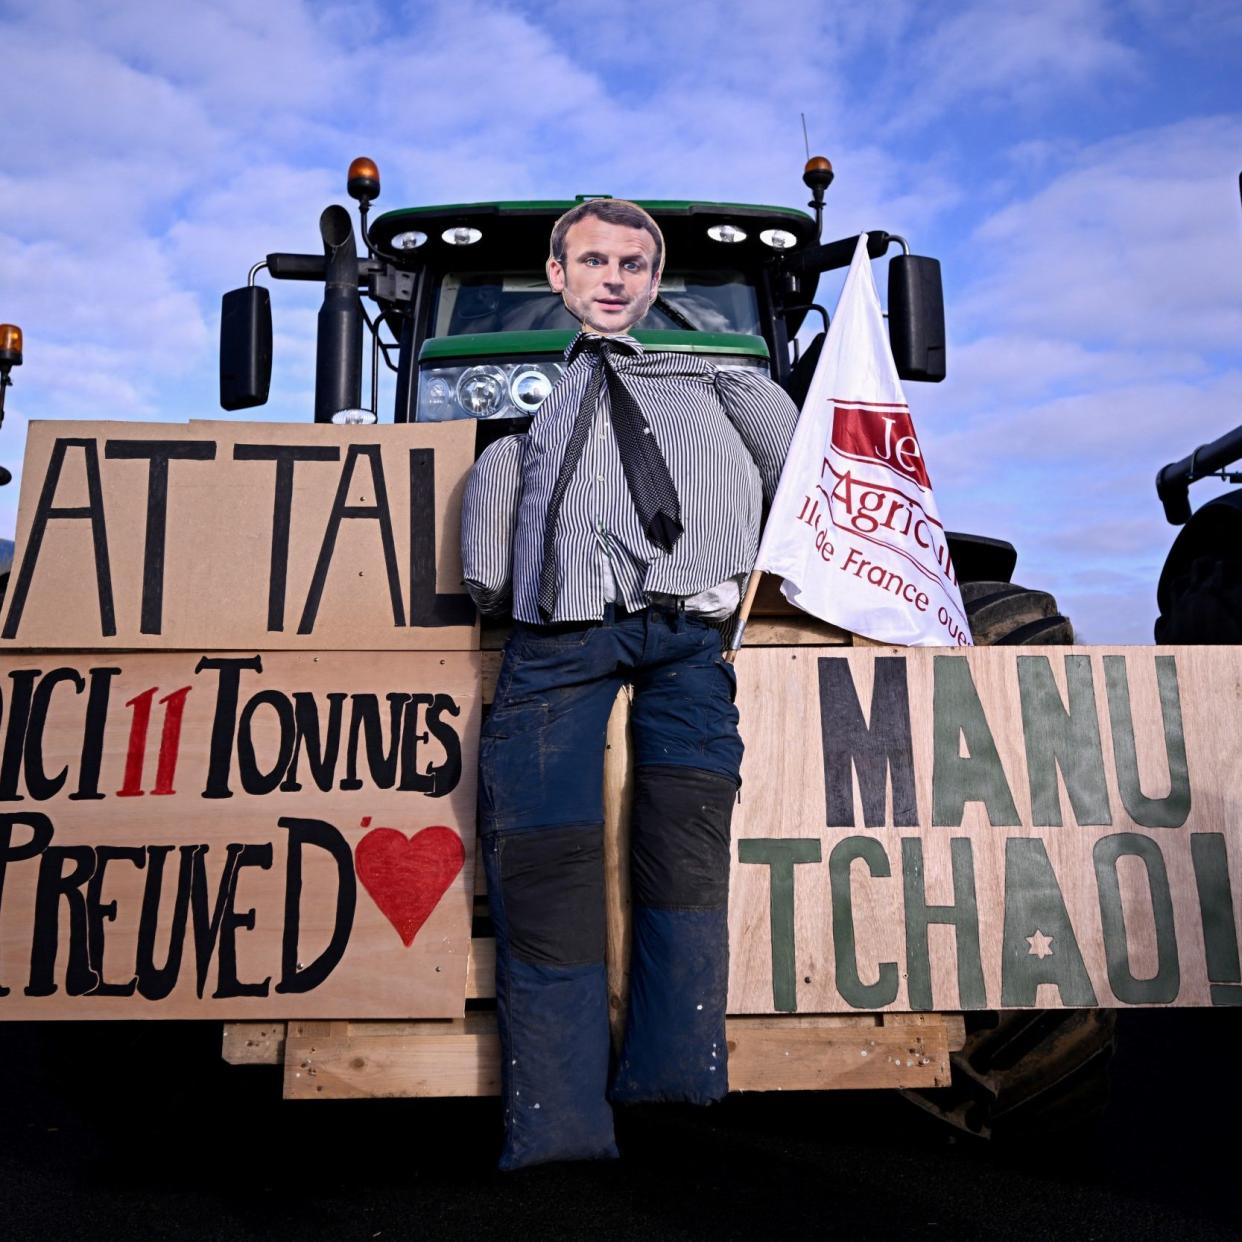 Farmers' revolts have roiled France and other European countries in recent months